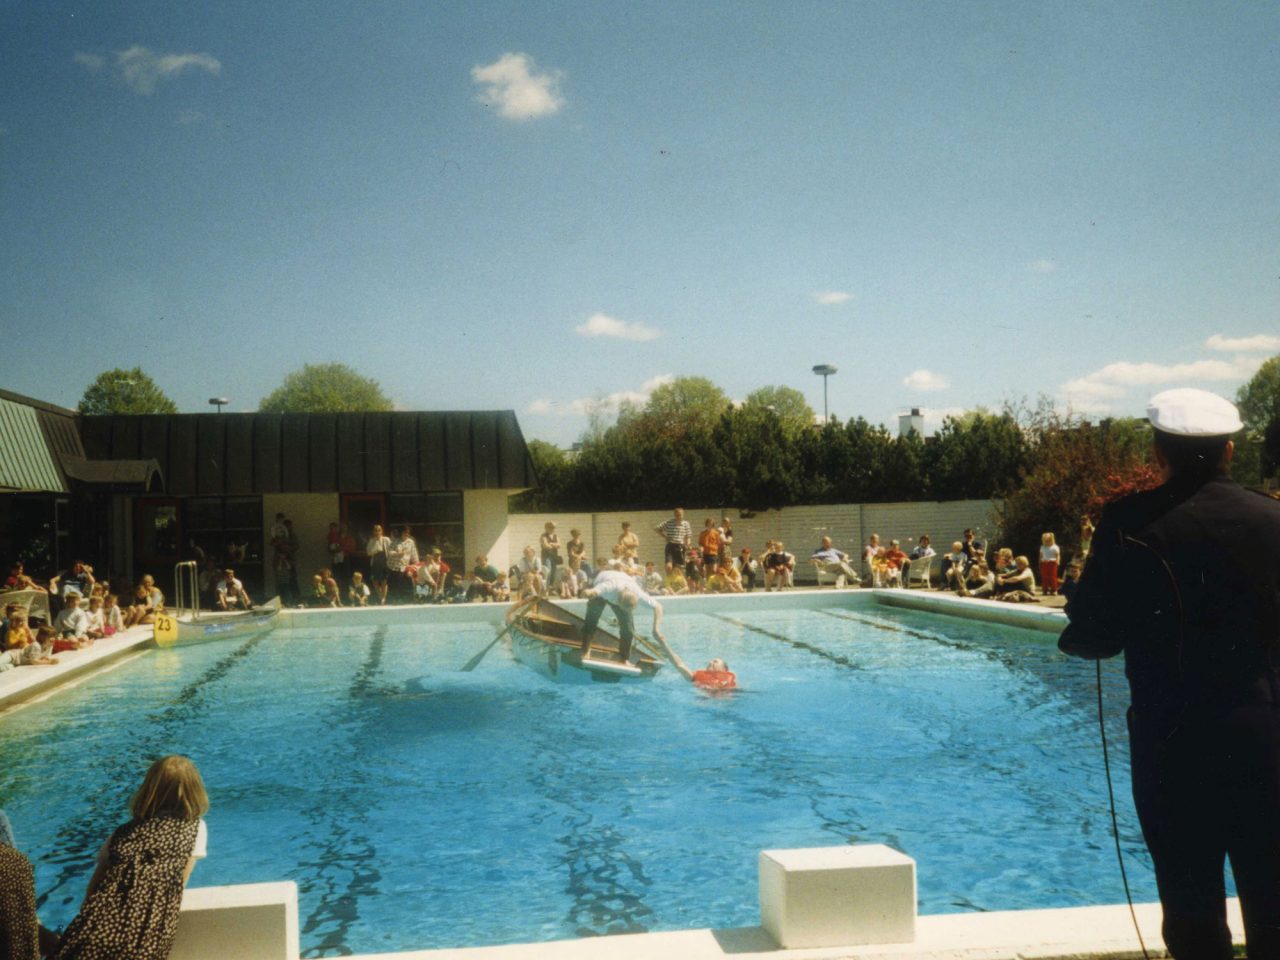 Audience around swimming pool where one stands in a small rowing boat and shows life saving of a person in the pool.